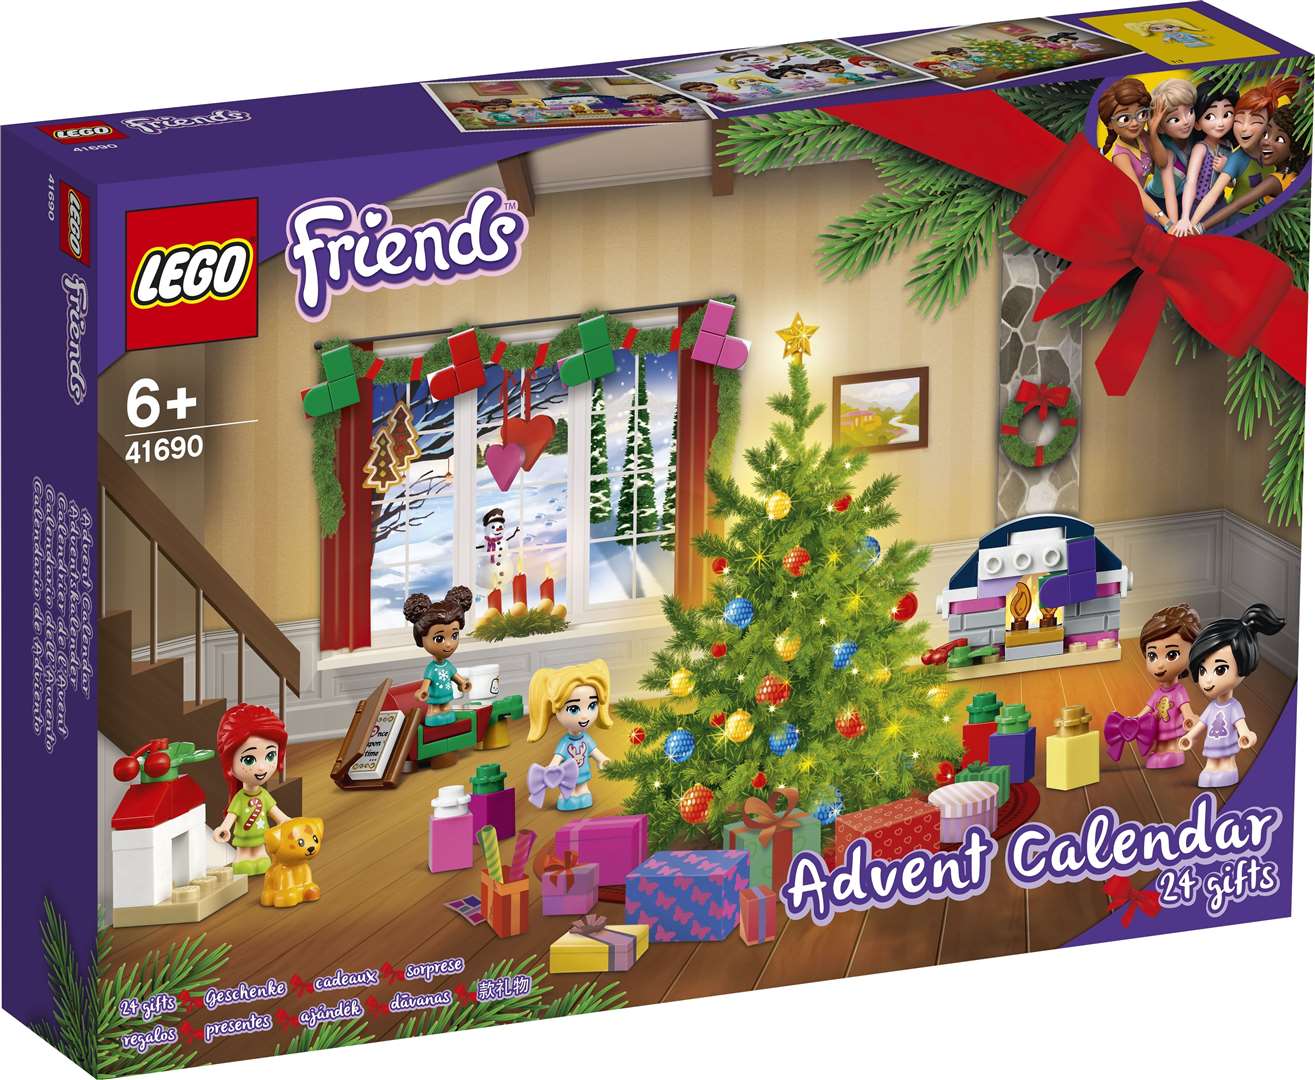 The Lego Friends calendar is available to buy for £19.99